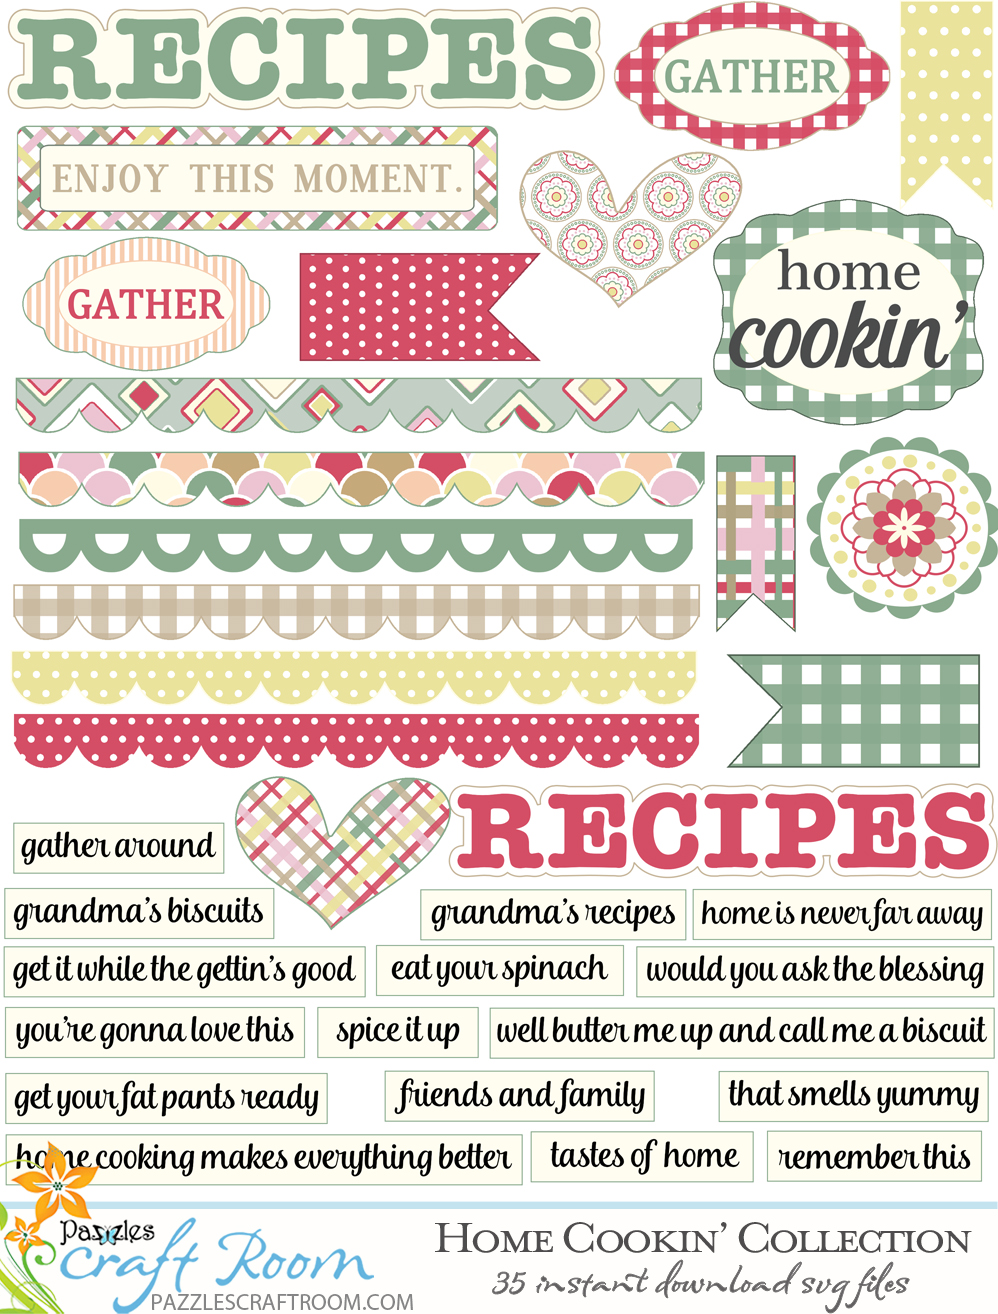 Pazzles :: Supplies and Accessories :: Inspiration Vue Print and